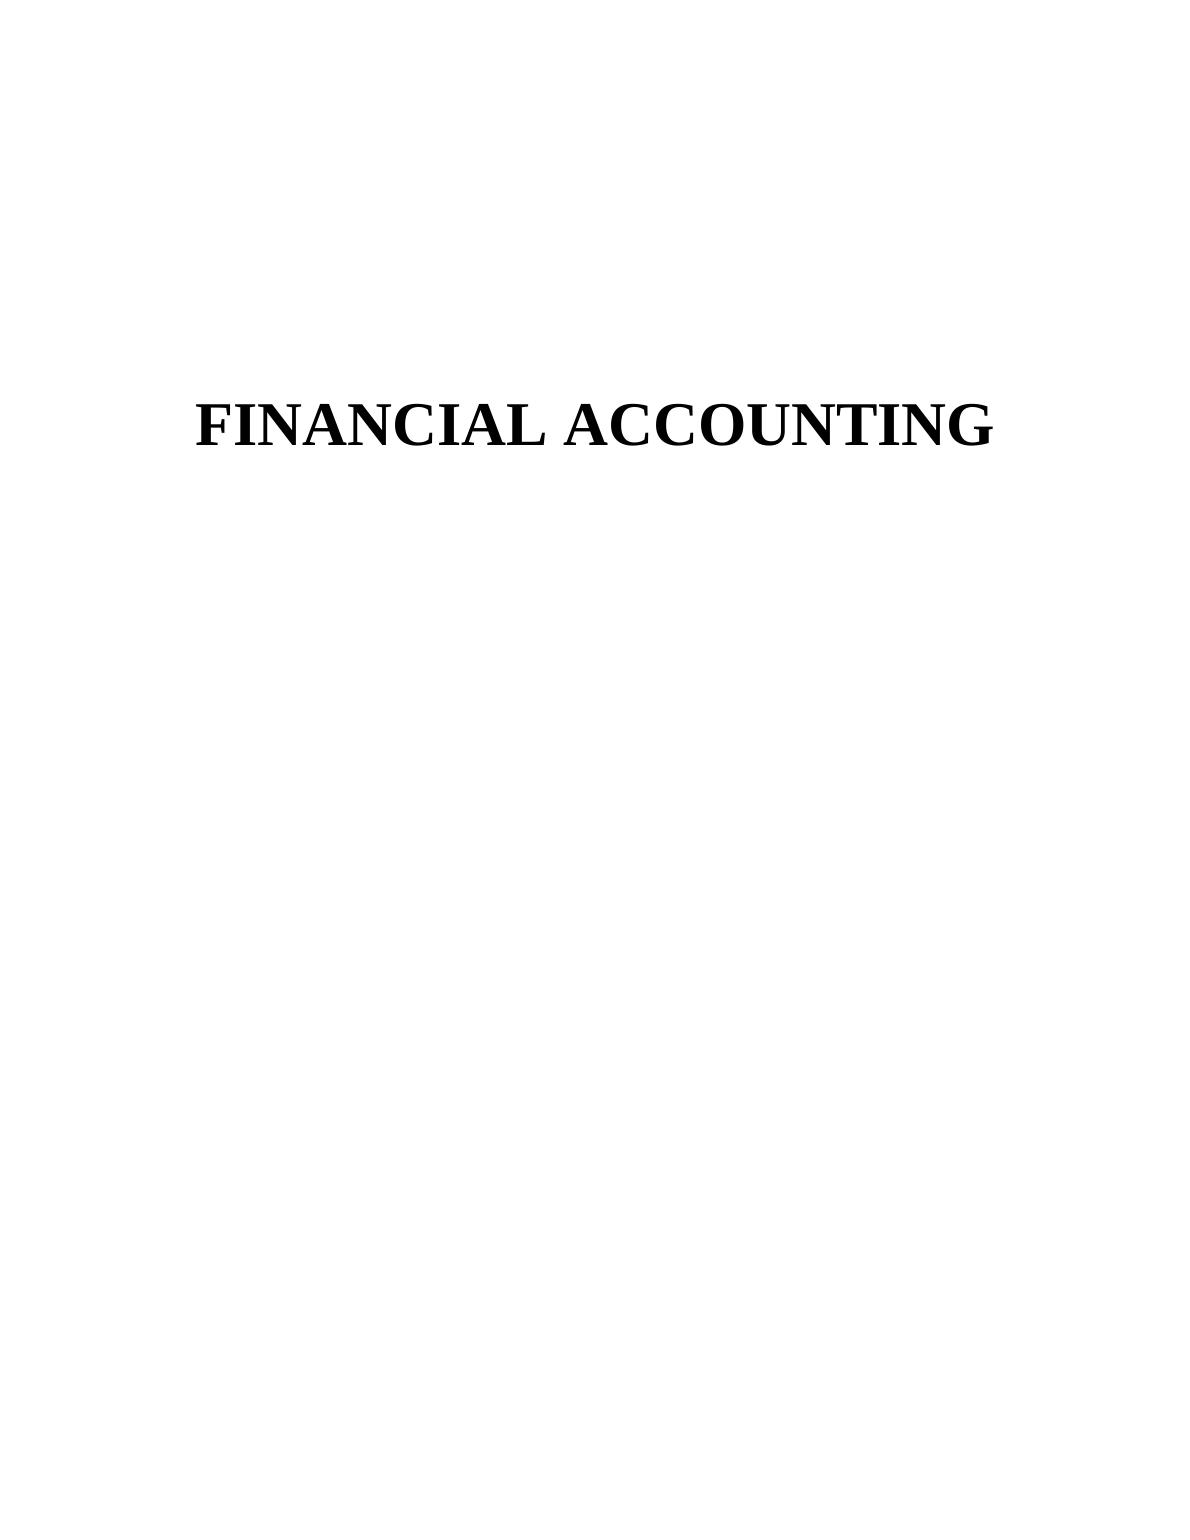 Financial Accounting: Income Statement, Statement of Financial Position, Assumptions, and Cash Flow Statement_1